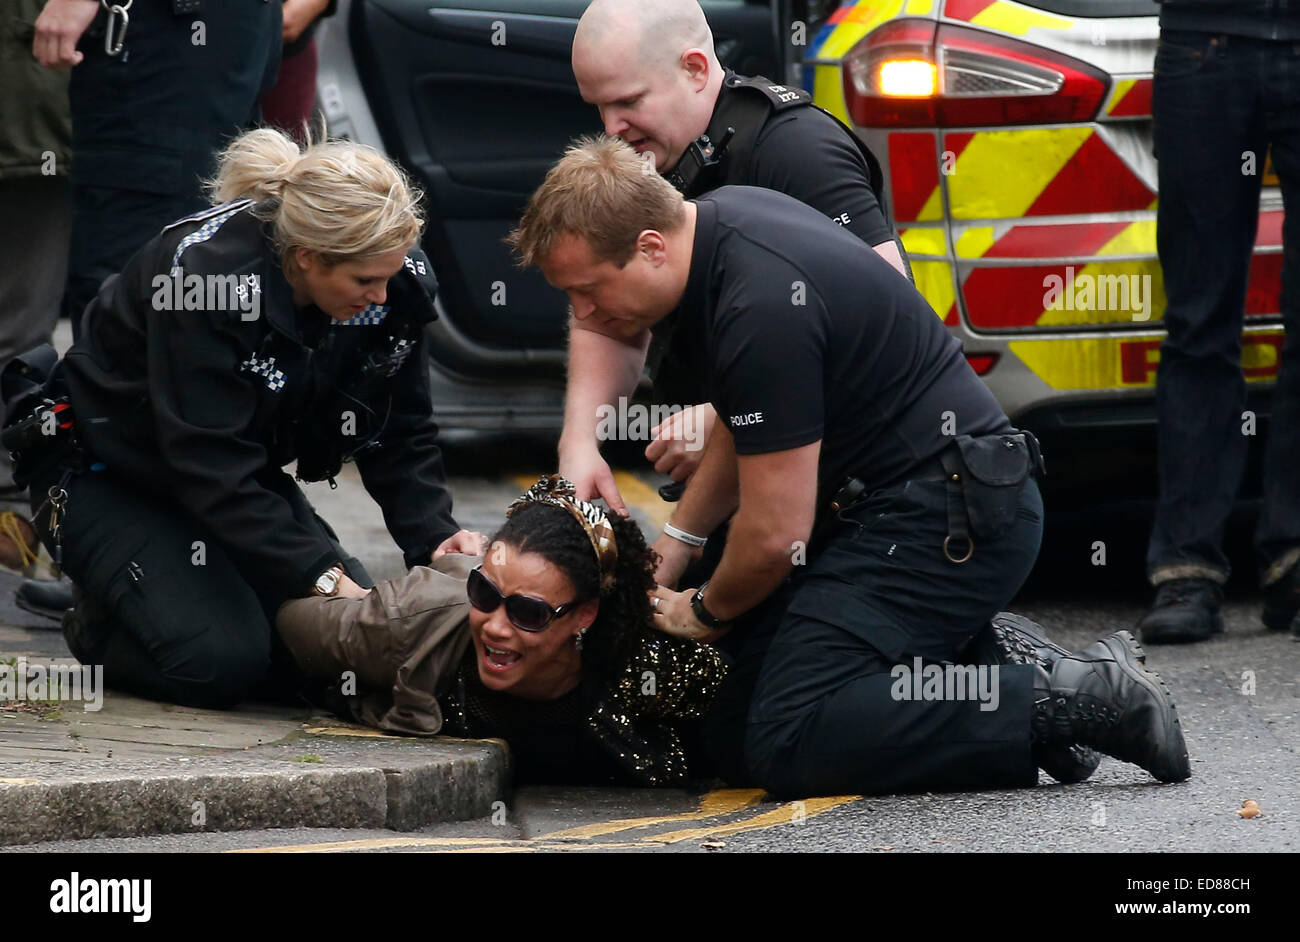 A woman is restrained and arrested by police for being drunk and disorderly. January 1 2015 (Outcome of arrest unknown) Picture by James Boardman. Stock Photo